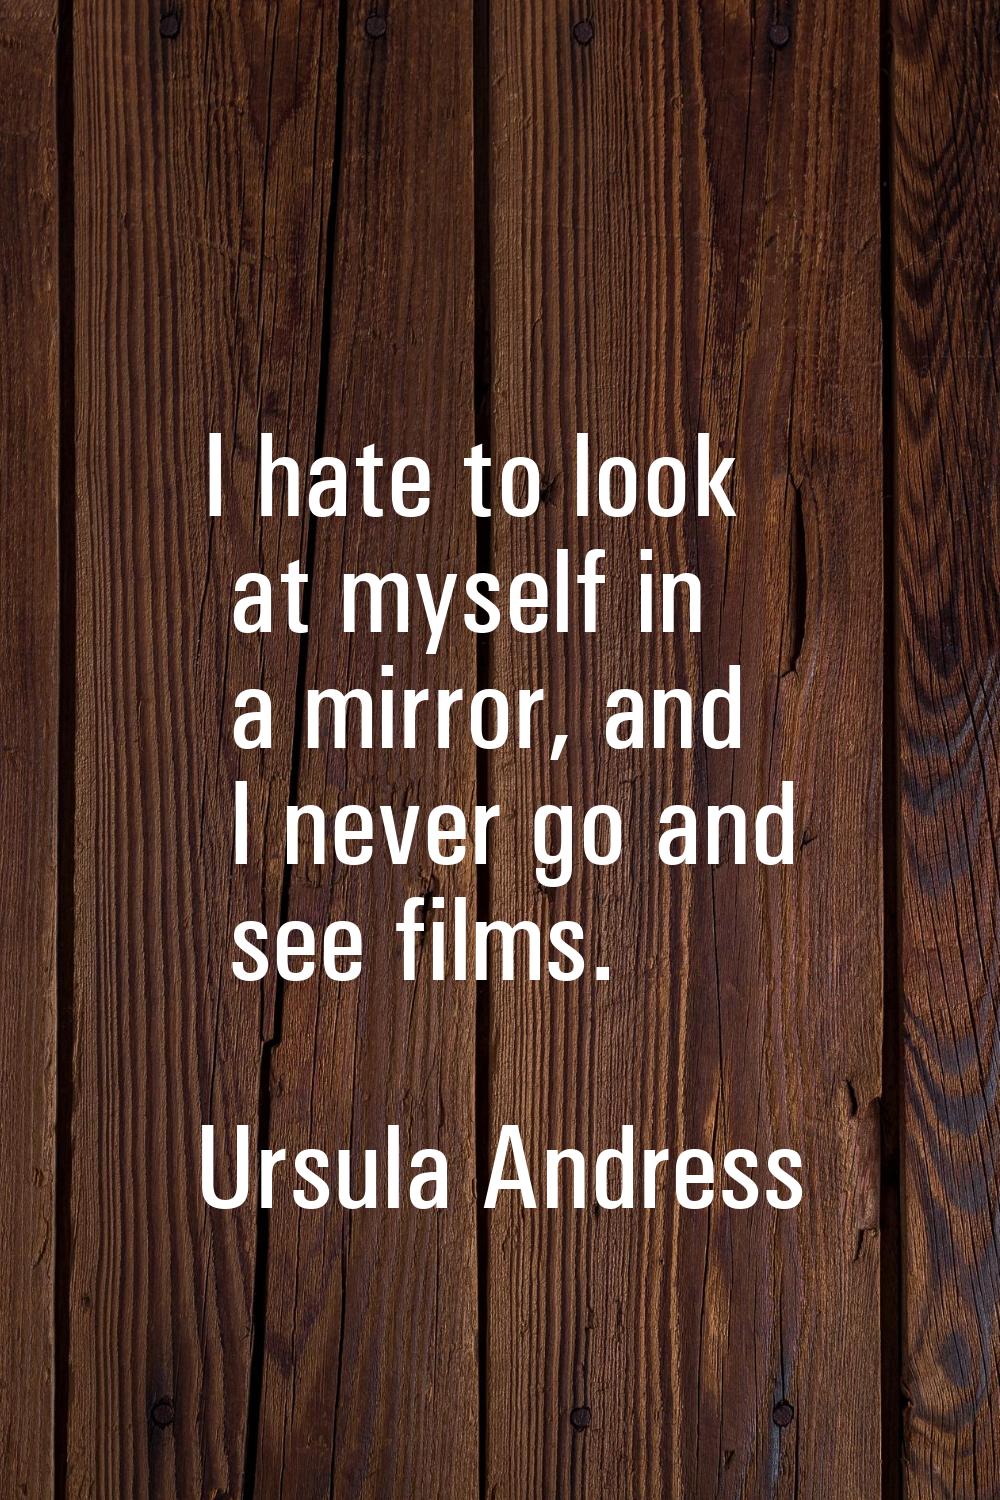 I hate to look at myself in a mirror, and I never go and see films.